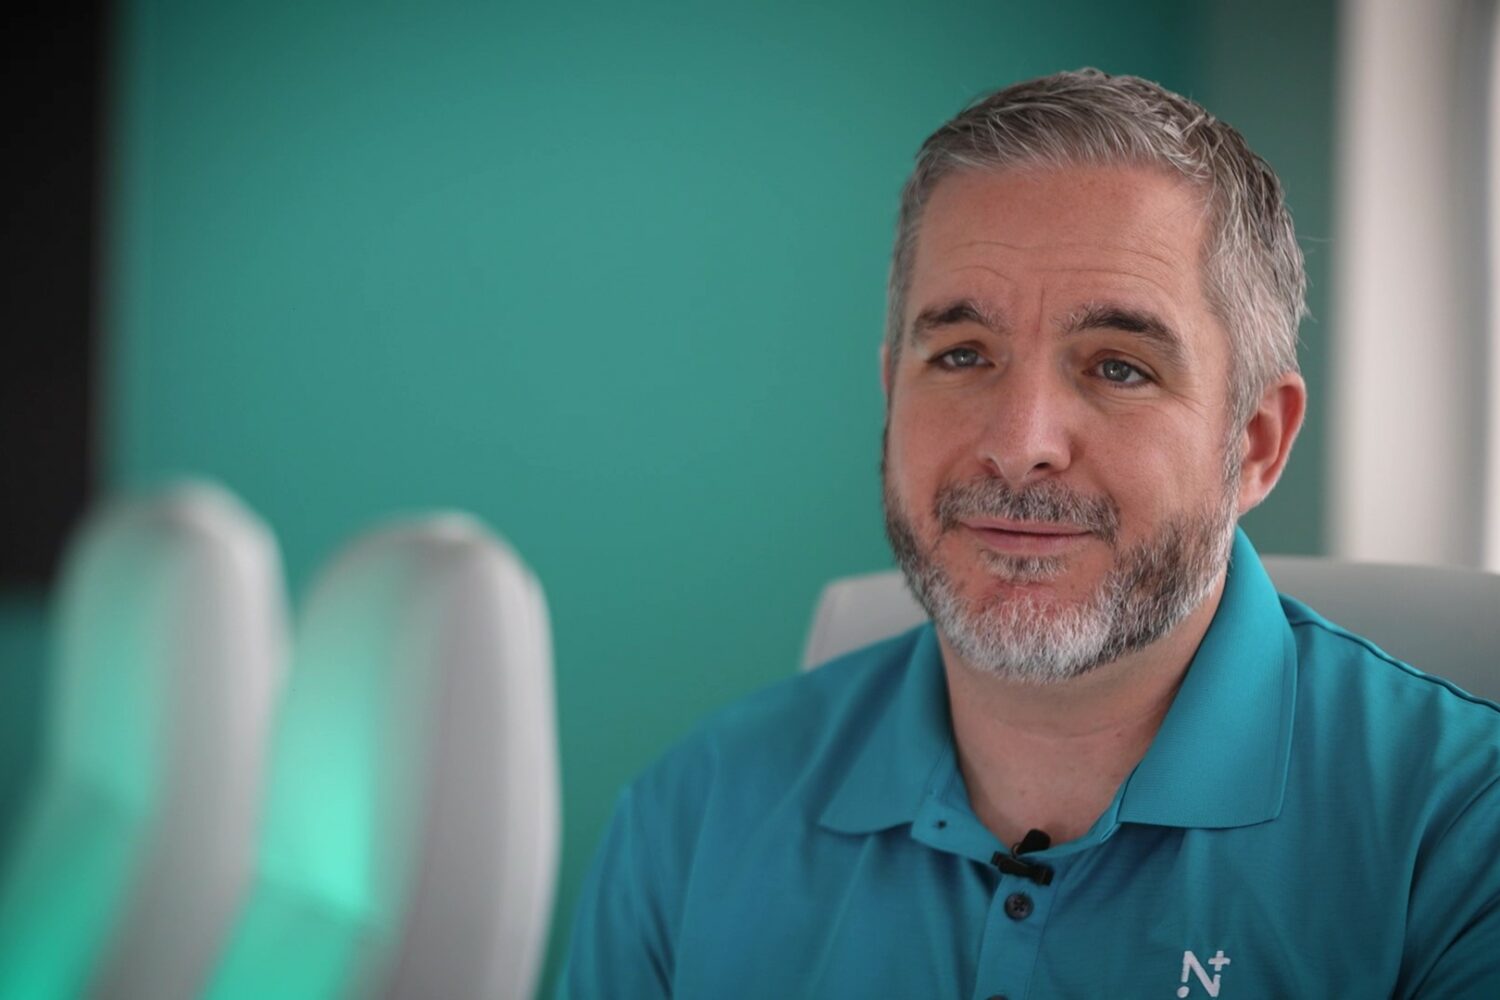 How Mark Newman is building a direct healthcare provider to help solve America’s healthcare problem with Nomi Health, a healthcare tech provider.